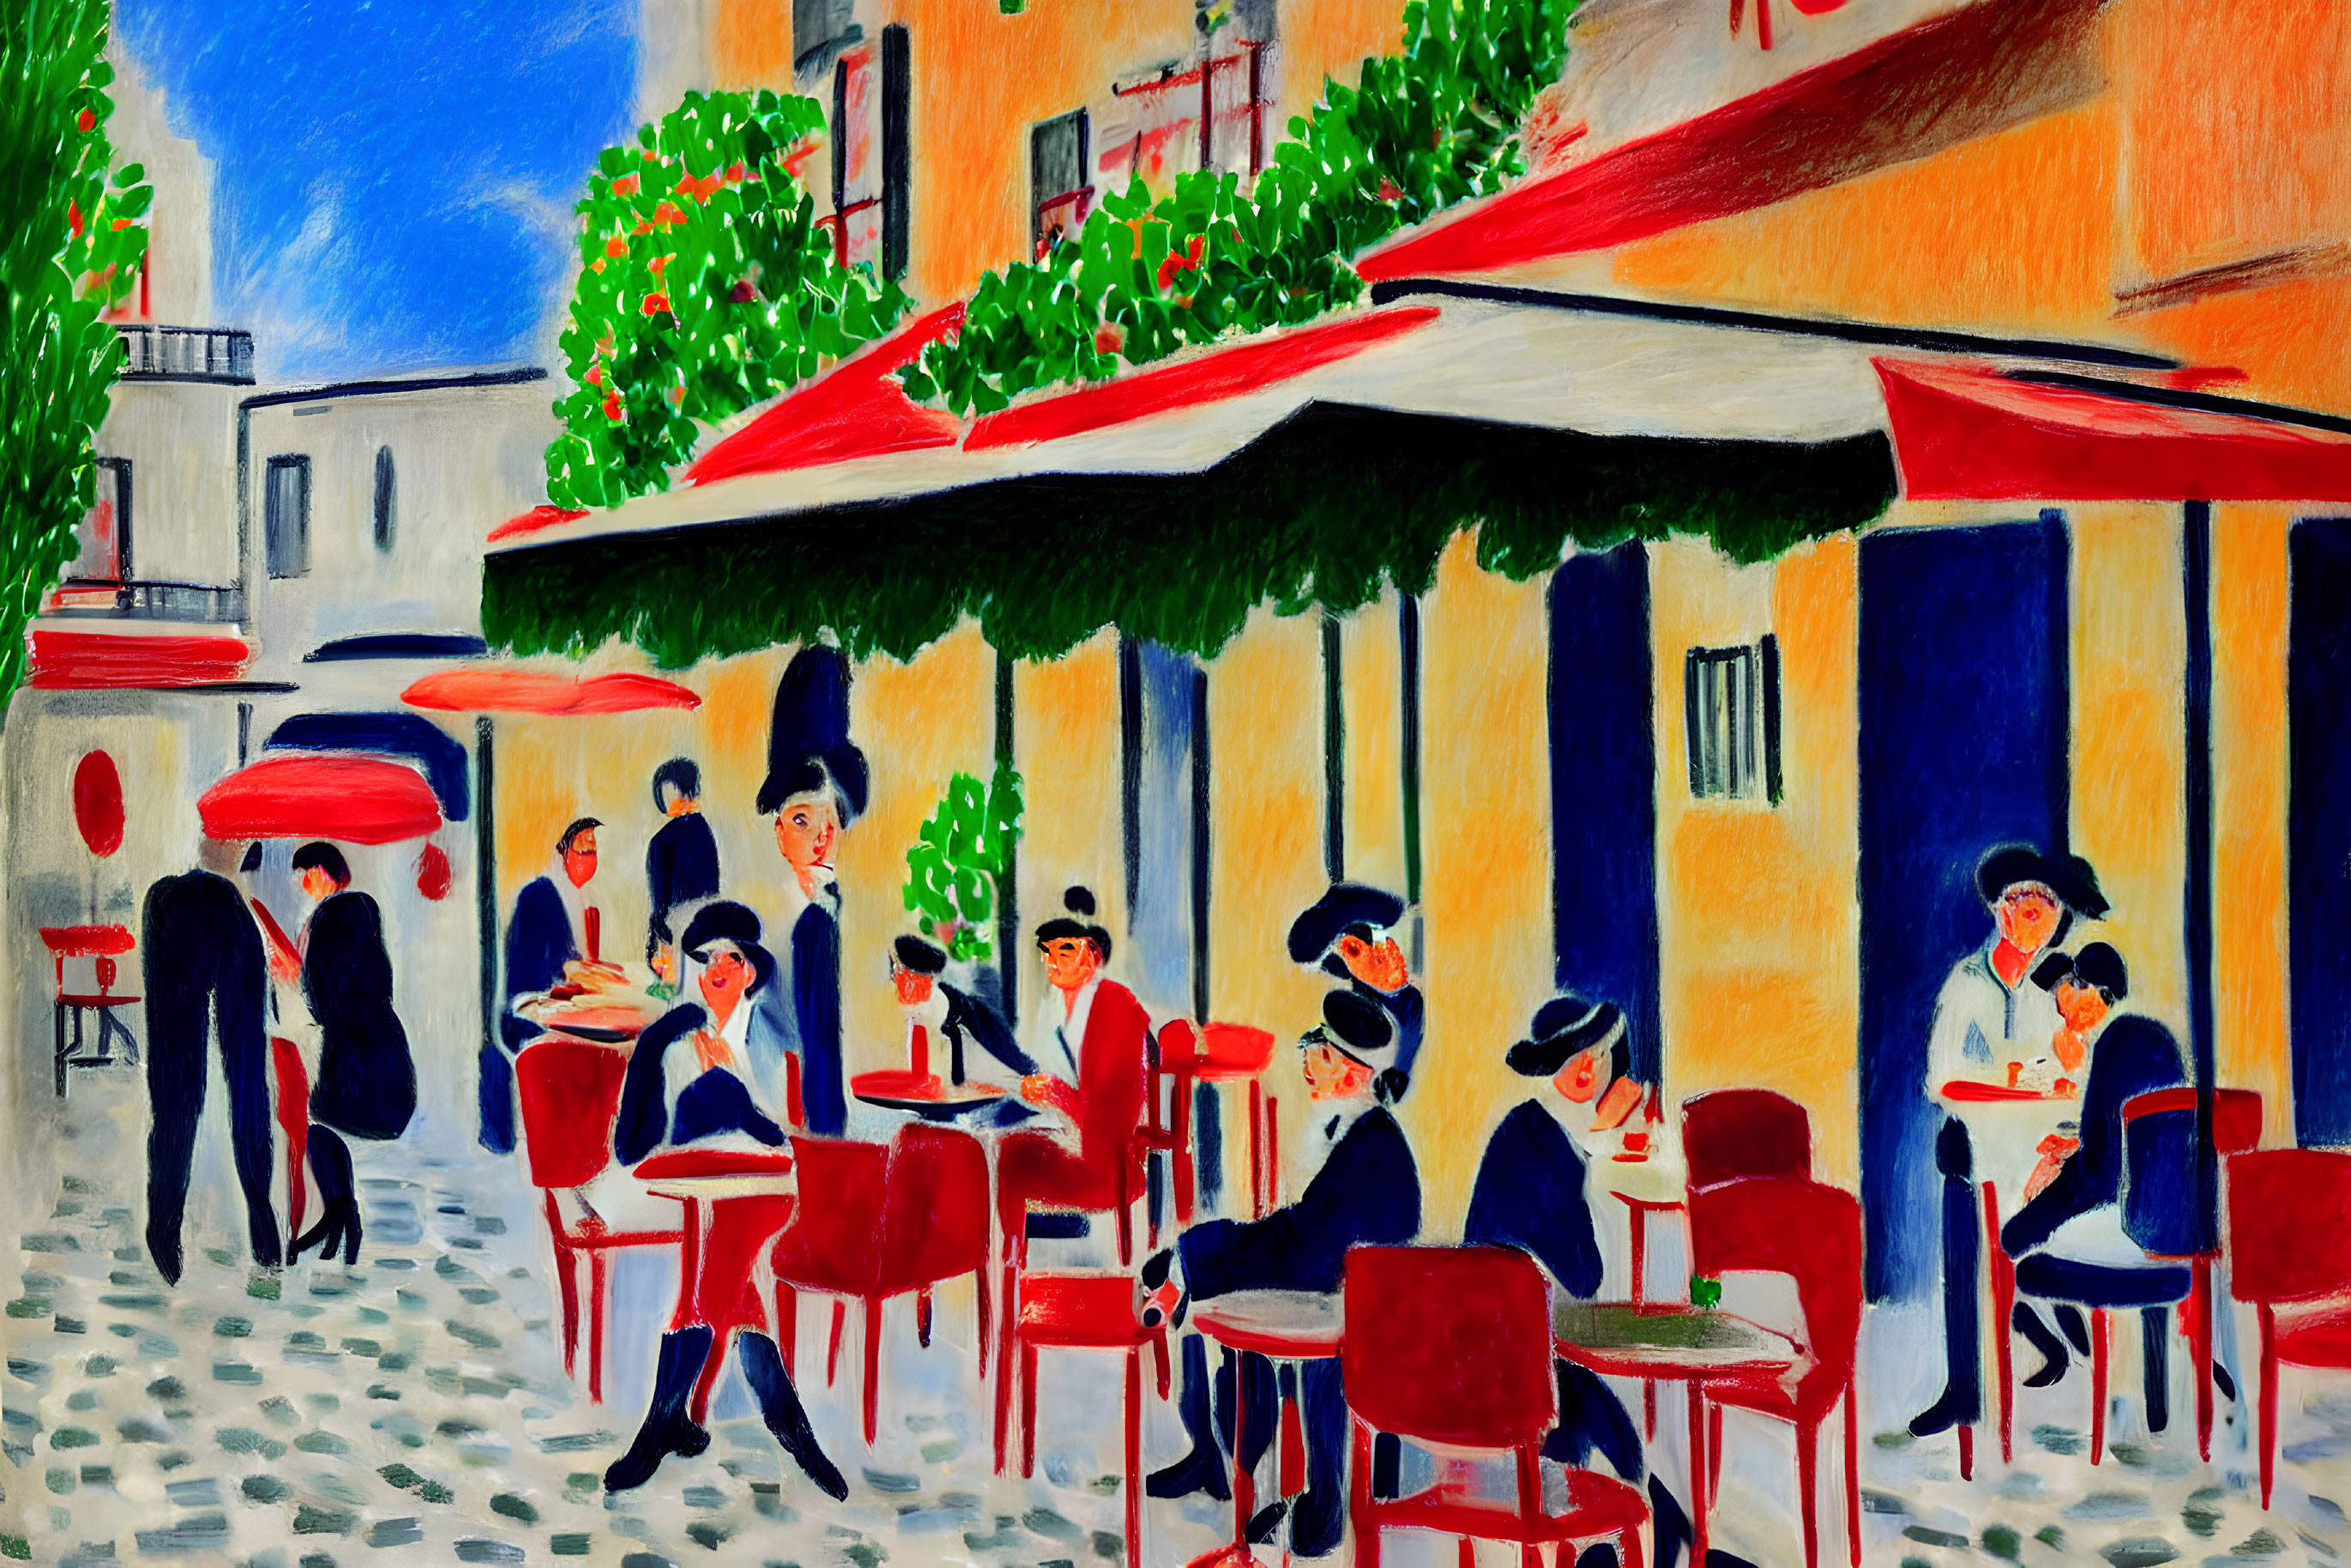 Colorful street scene painting: people dining under red awnings, cafe, buildings, trees.